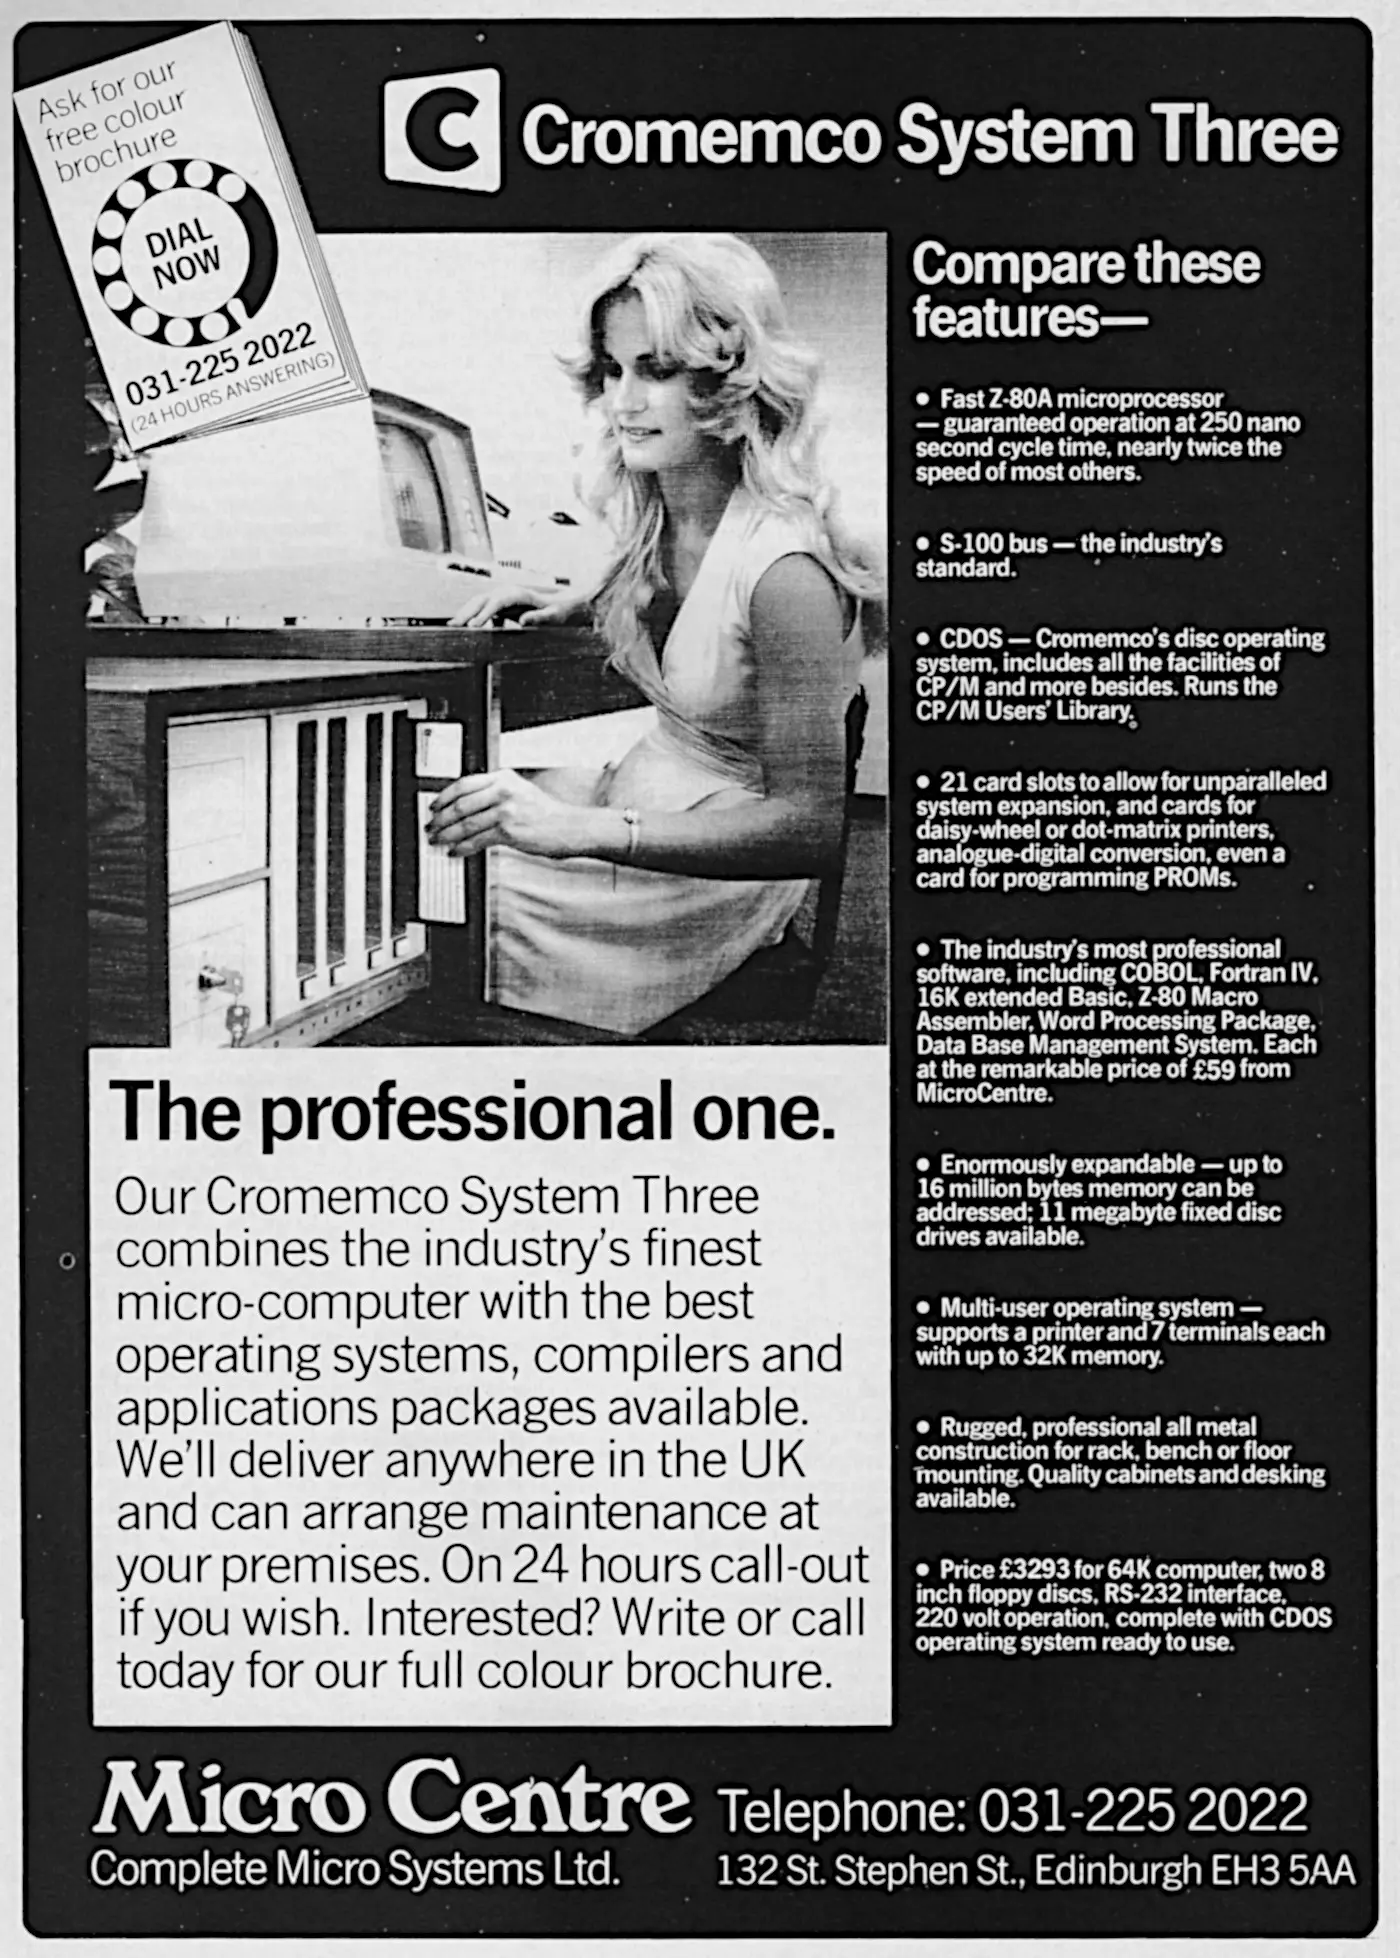 Cromemco Advert: Cromemco System Three - the professional one, from Personal Computer World, August 1979